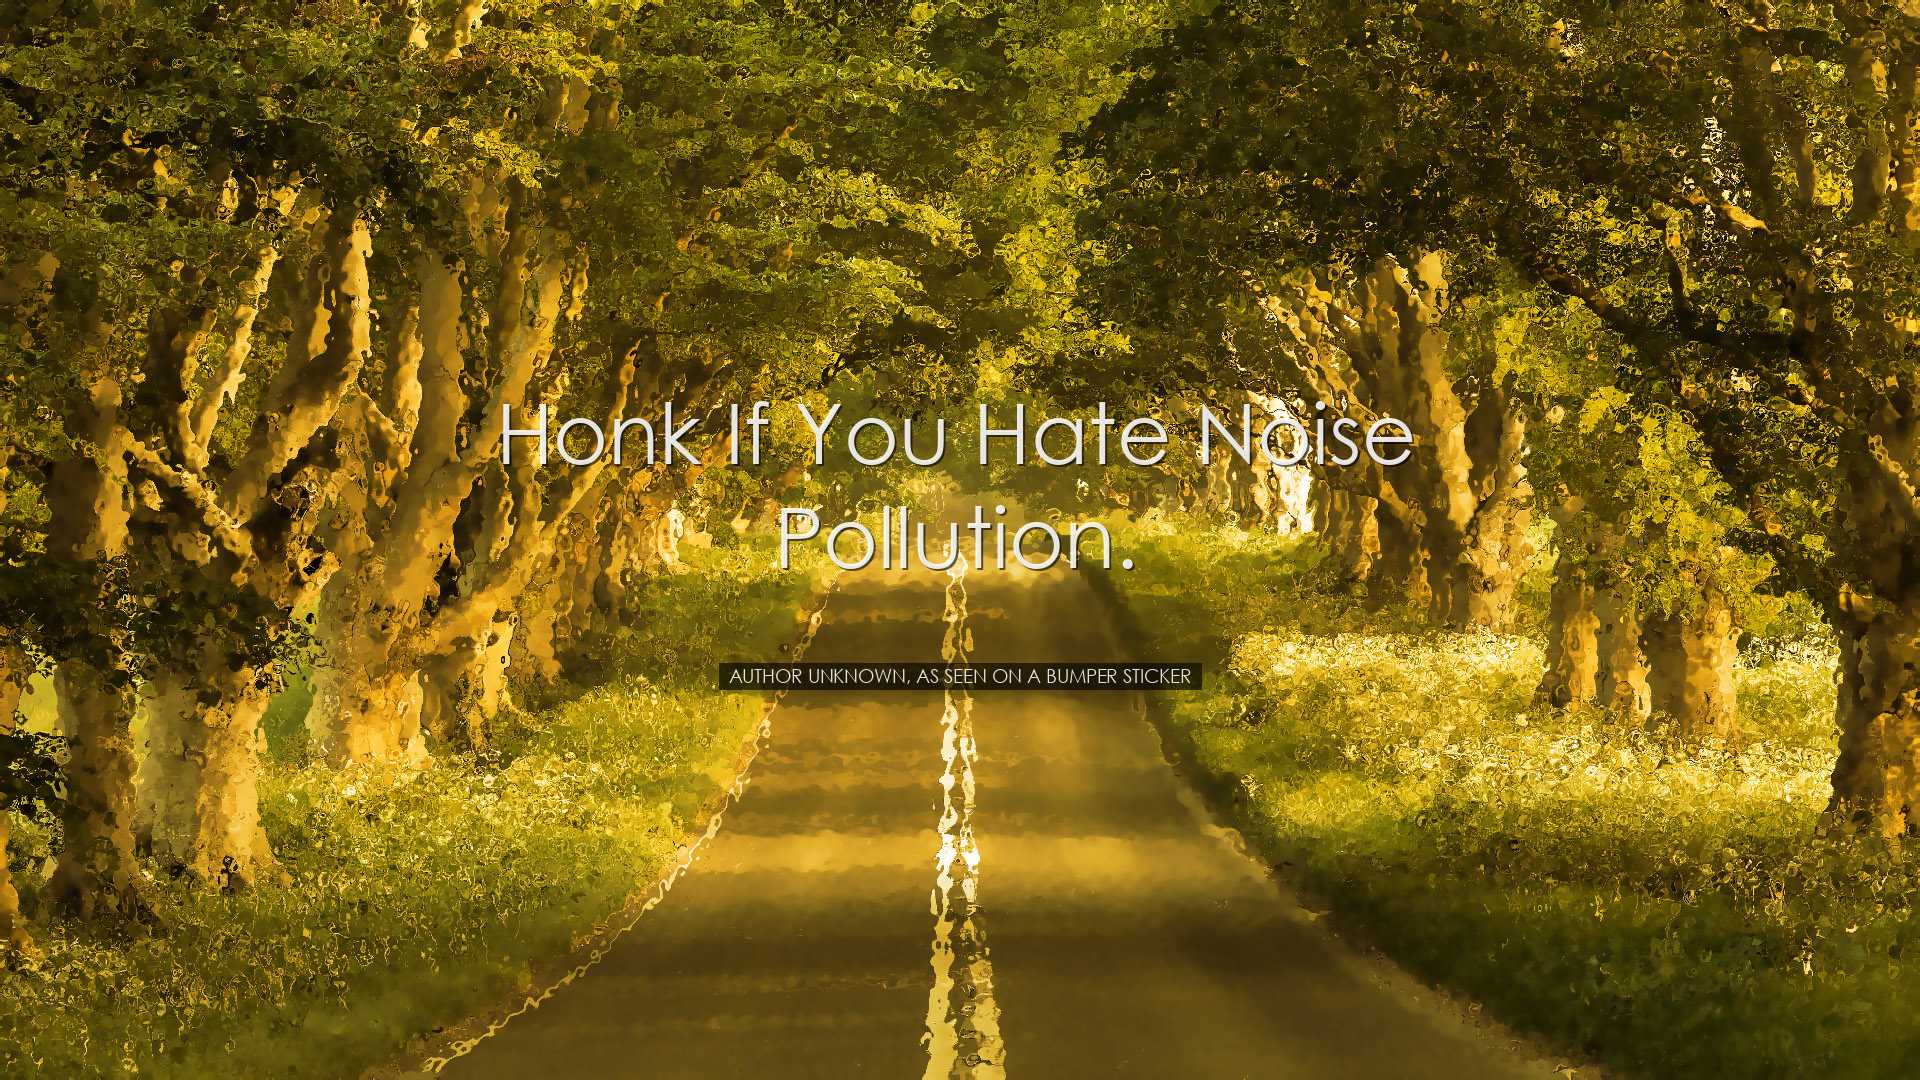 Honk if you hate noise pollution. - Author unknown, as seen on a b